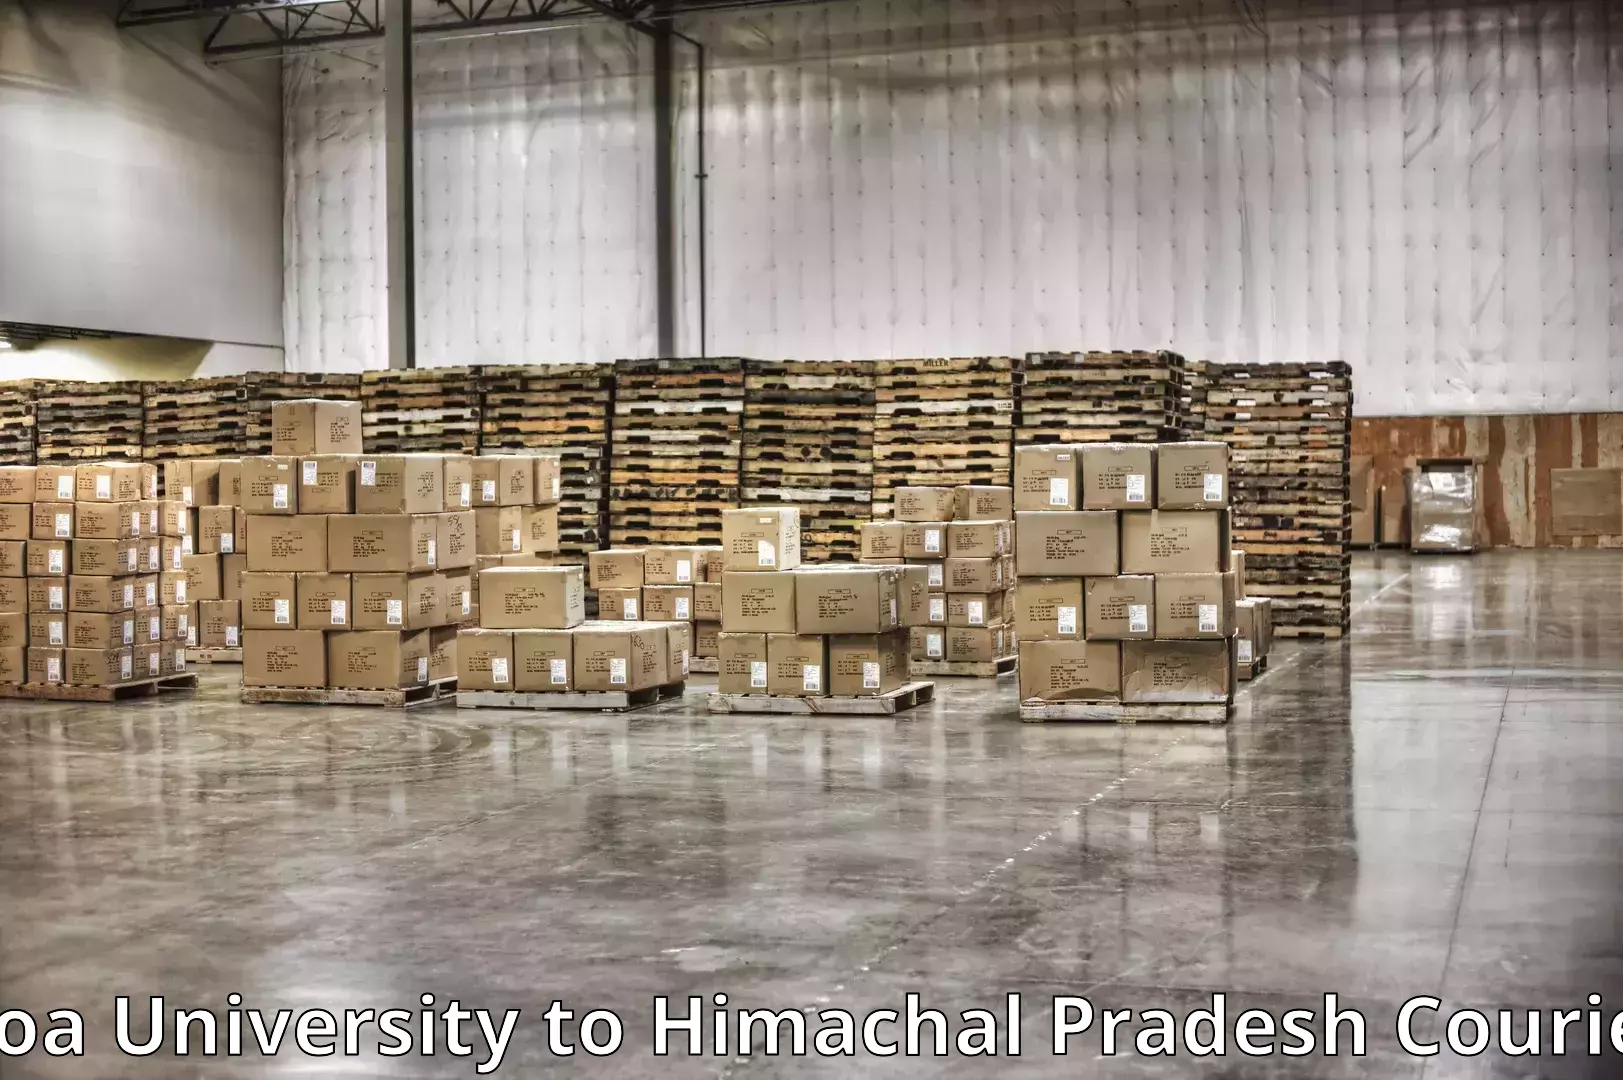 Efficient relocation services in Goa University to Kala Amb